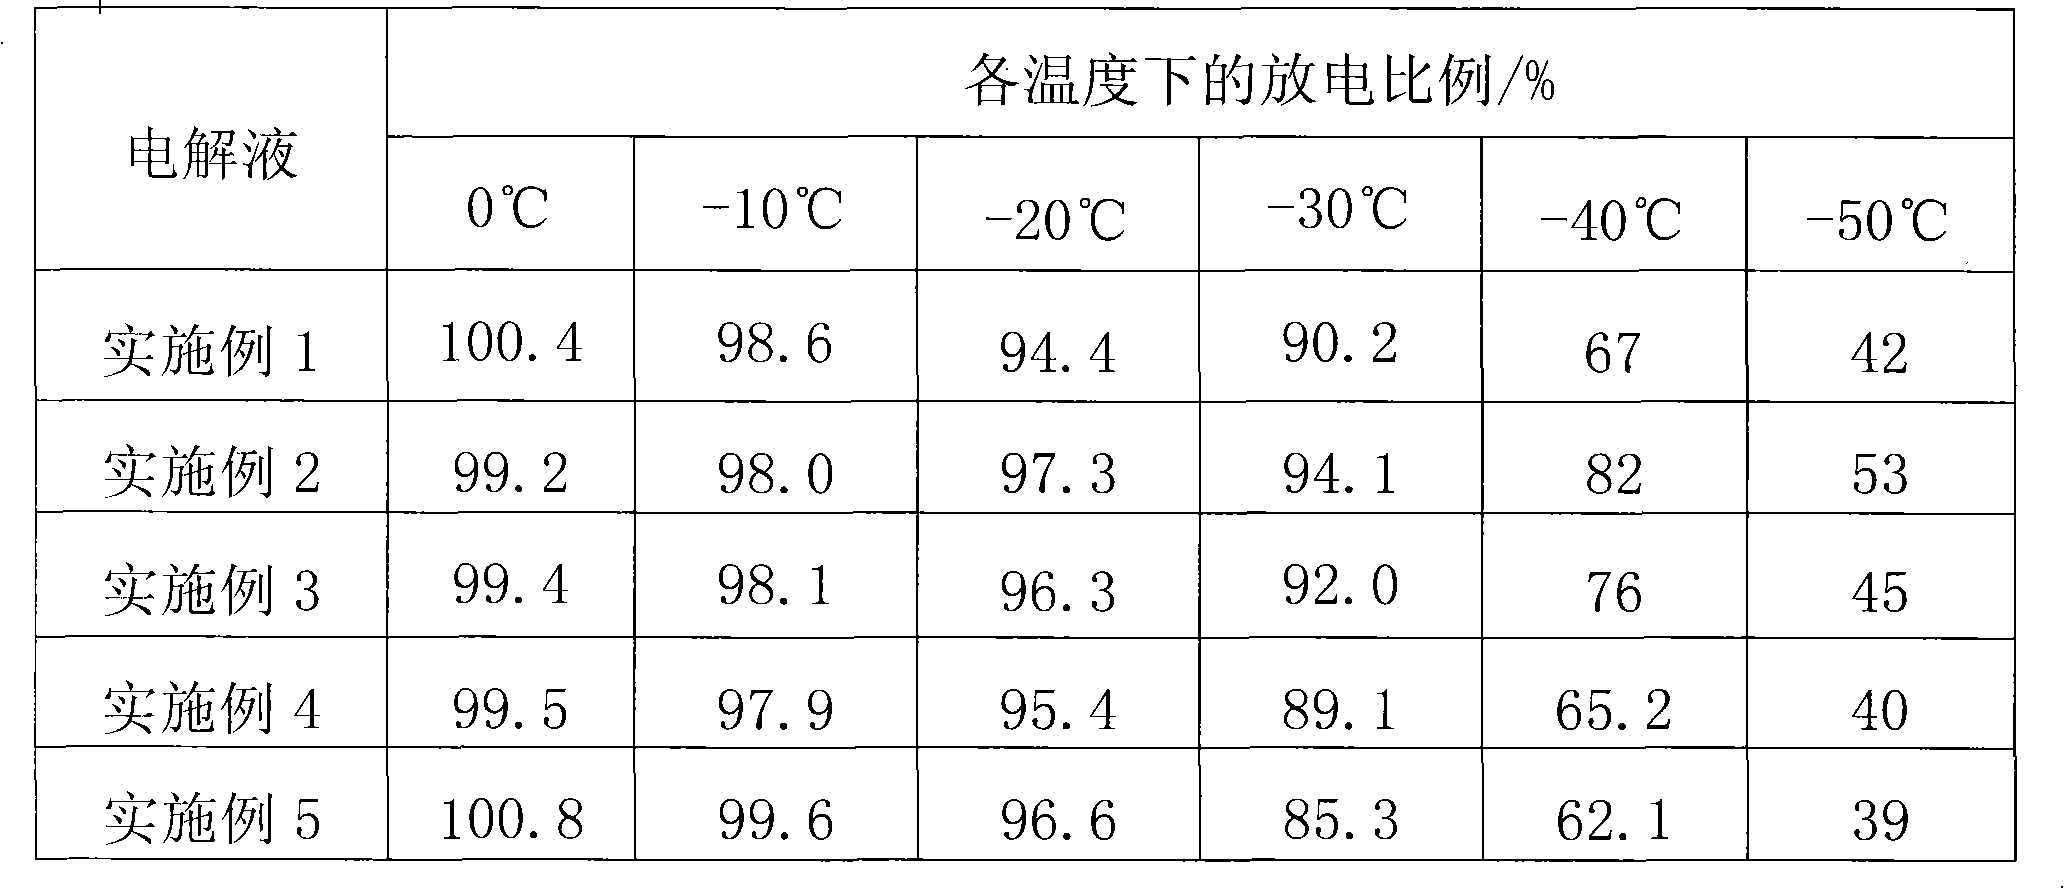 Low temperature type lithium ion battery electrolyte with high temperature property and lithium ion battery